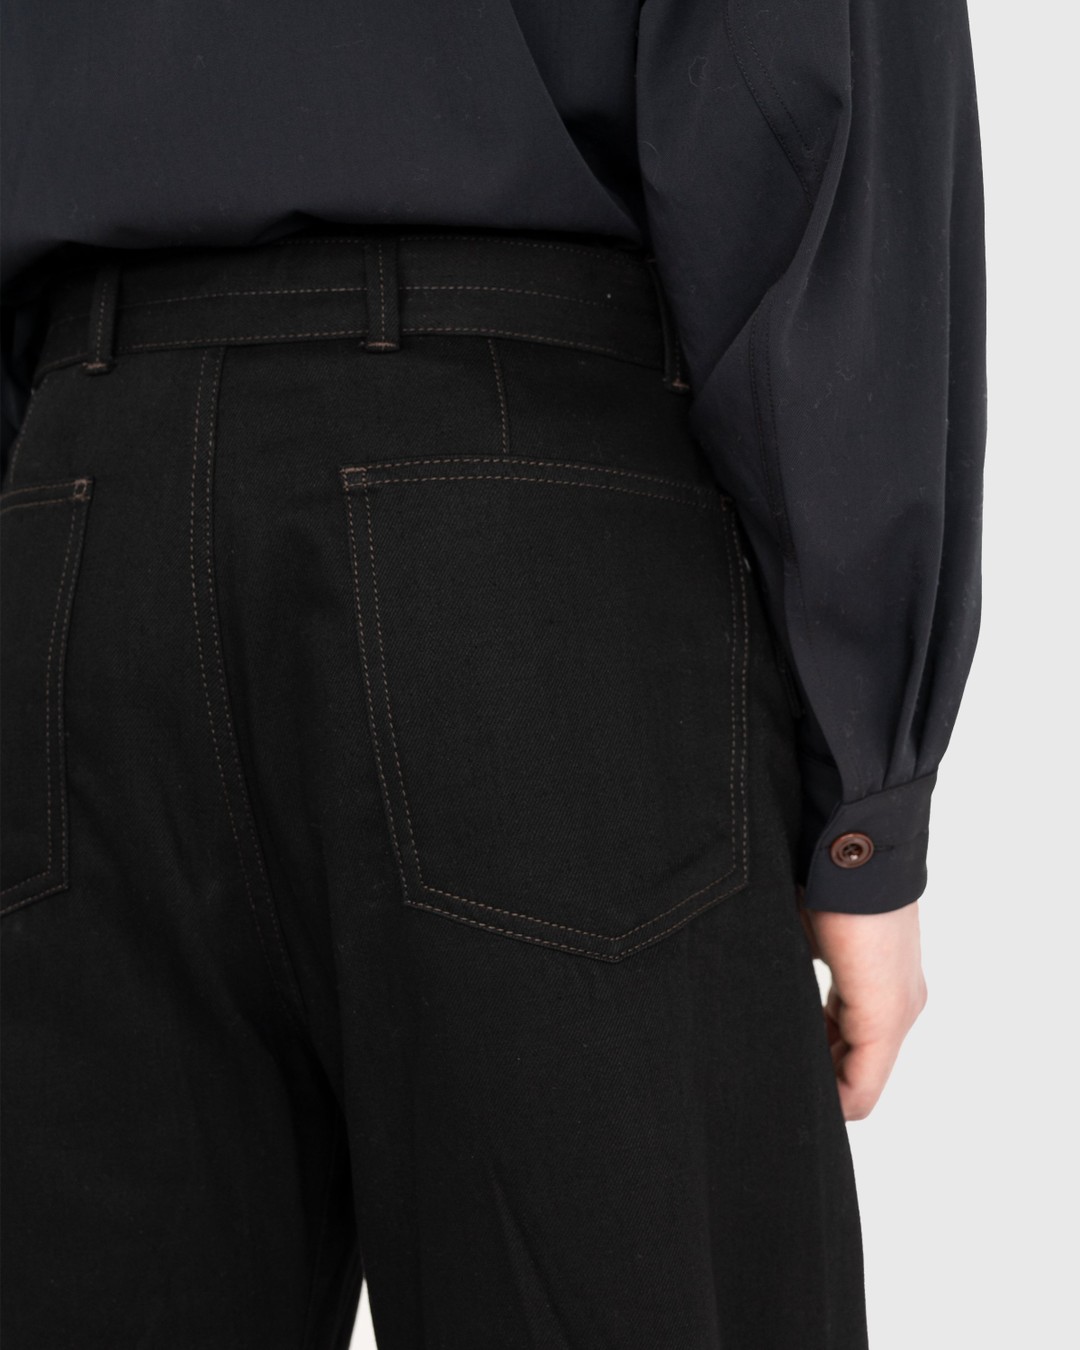 Lemaire – Twisted Belted Pants Black - Trousers - Black - Image 5